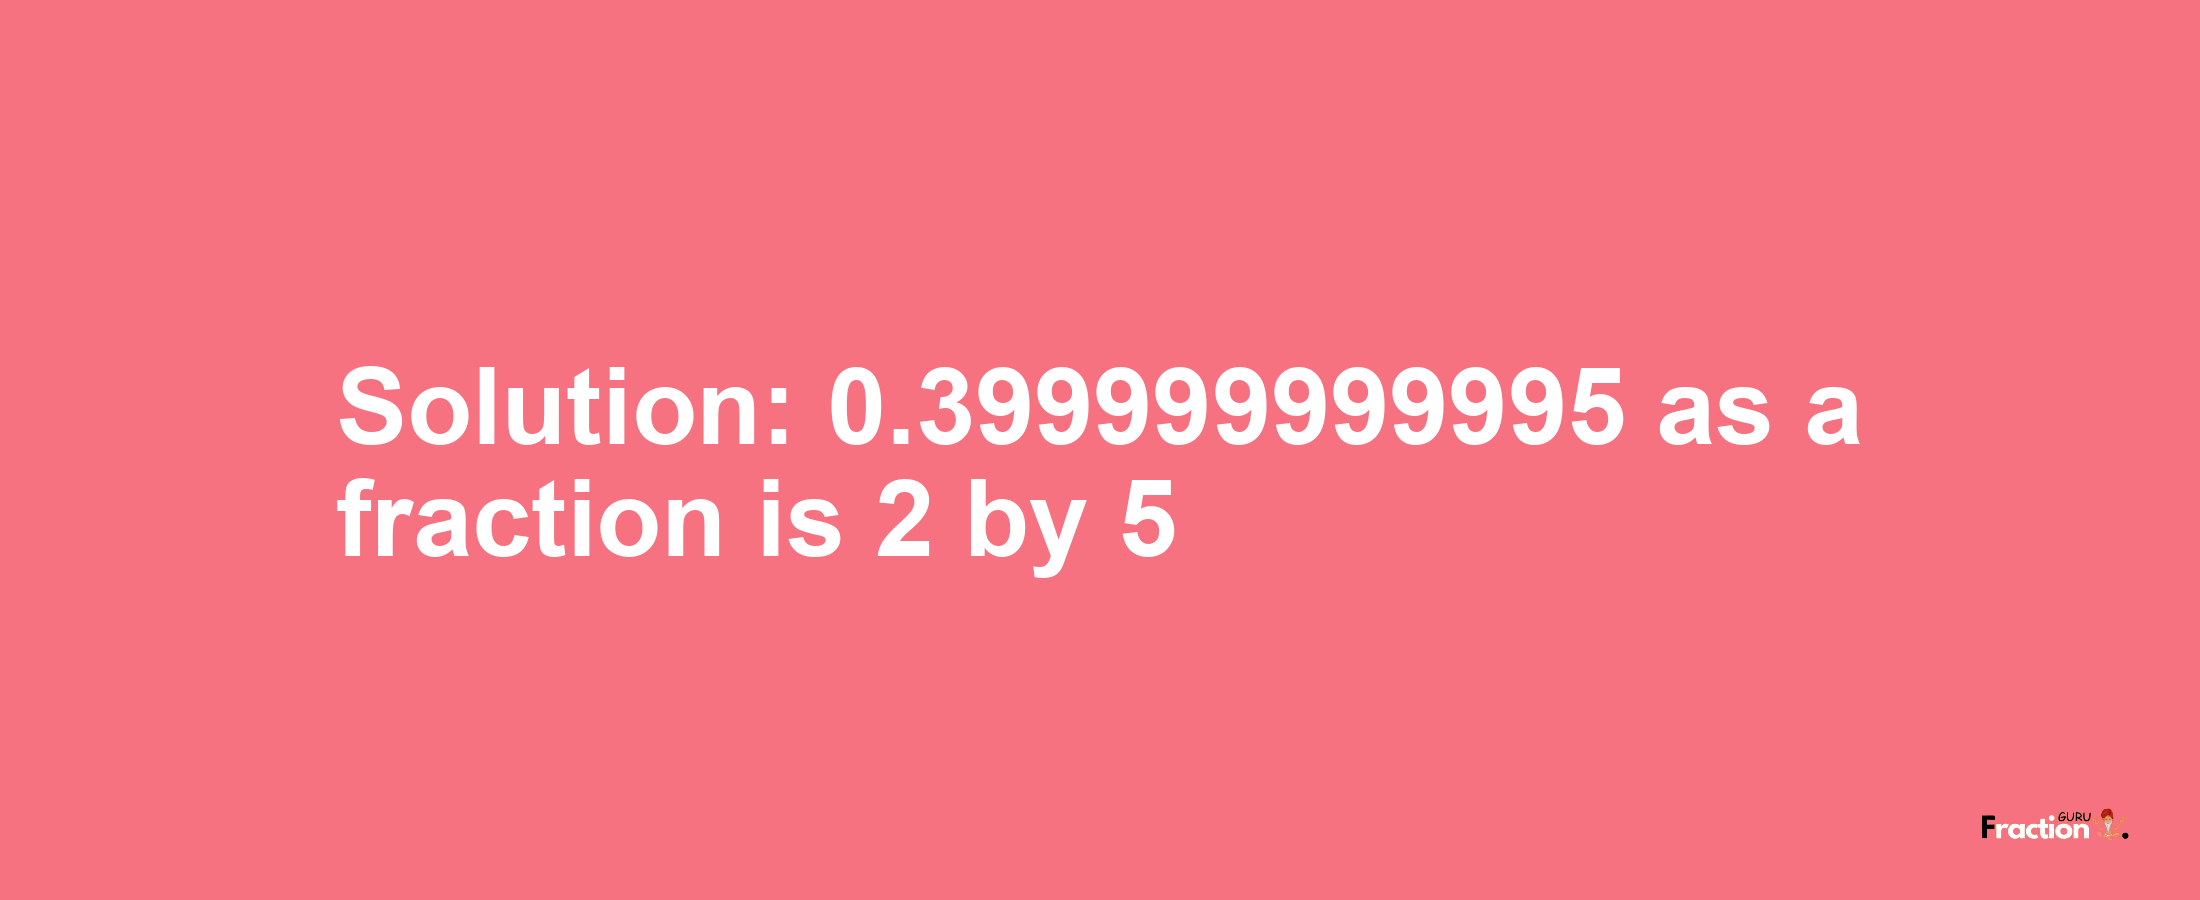 Solution:0.399999999995 as a fraction is 2/5